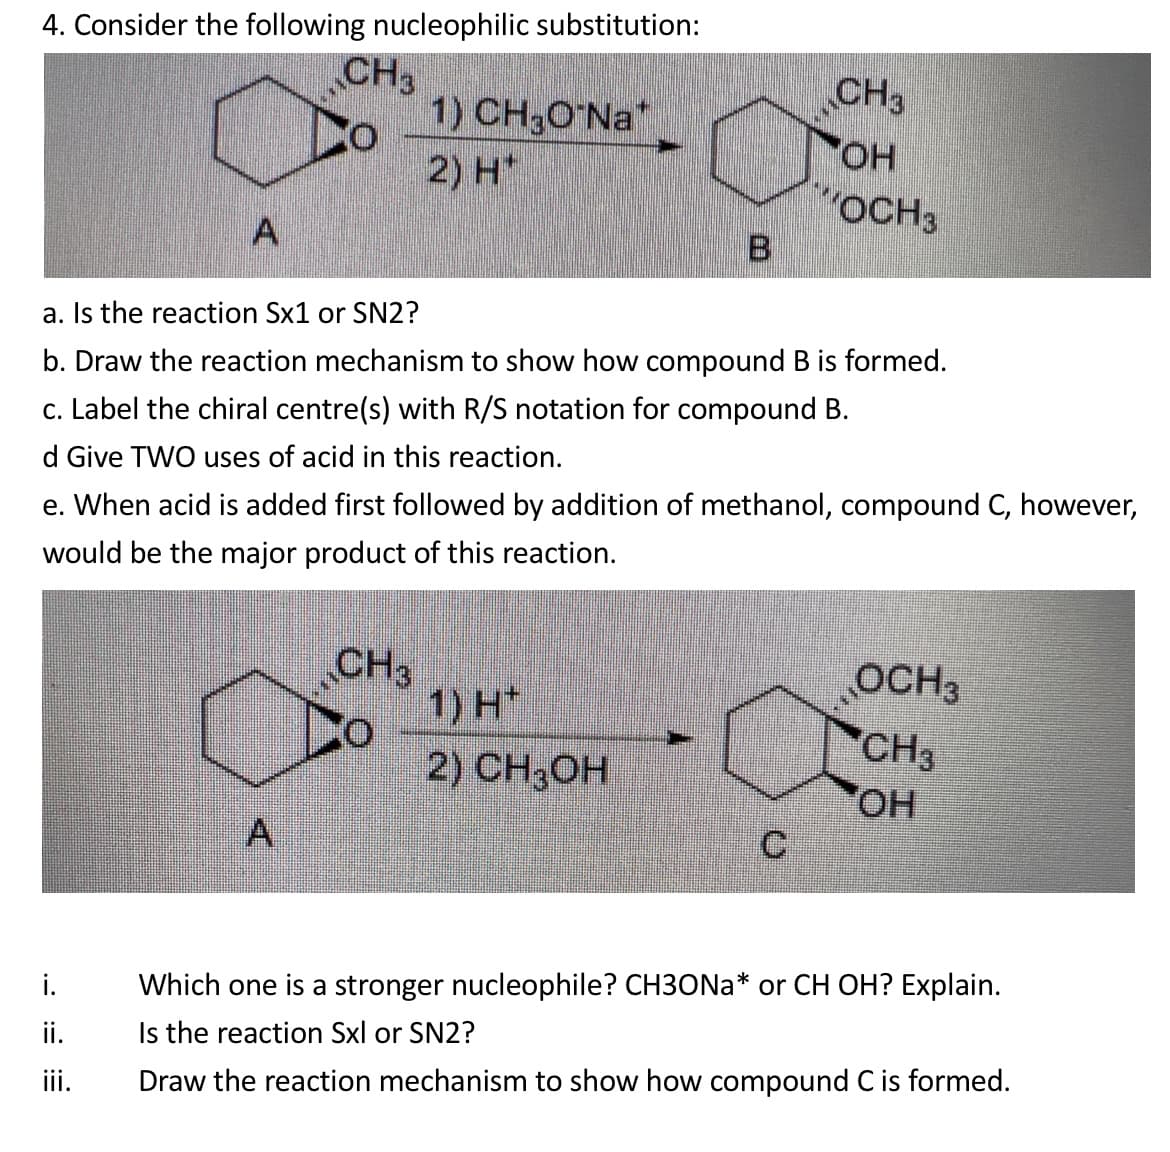 4. Consider the following nucleophilic substitution:
CH3
1) CH3O Na*
CH3
HO.
2) H*
"OCH3
a. Is the reaction Sx1 or SN2?
b. Draw the reaction mechanism to show how compound B is formed.
c. Label the chiral centre(s) with R/S notation for compound B.
d Give TWO uses of acid in this reaction.
e. When acid is added first followed by addition of methanol, compound C, however,
would be the major product of this reaction.
CH3
1) H*
2) CH3ОН
OCH3
CH3
OH
A,
Which one is a stronger nucleophile? CH3ONA* or CH OH? Explain.
ii.
Is the reaction Sxl or SN2?
iii.
Draw the reaction mechanism to show how compound C is formed.
